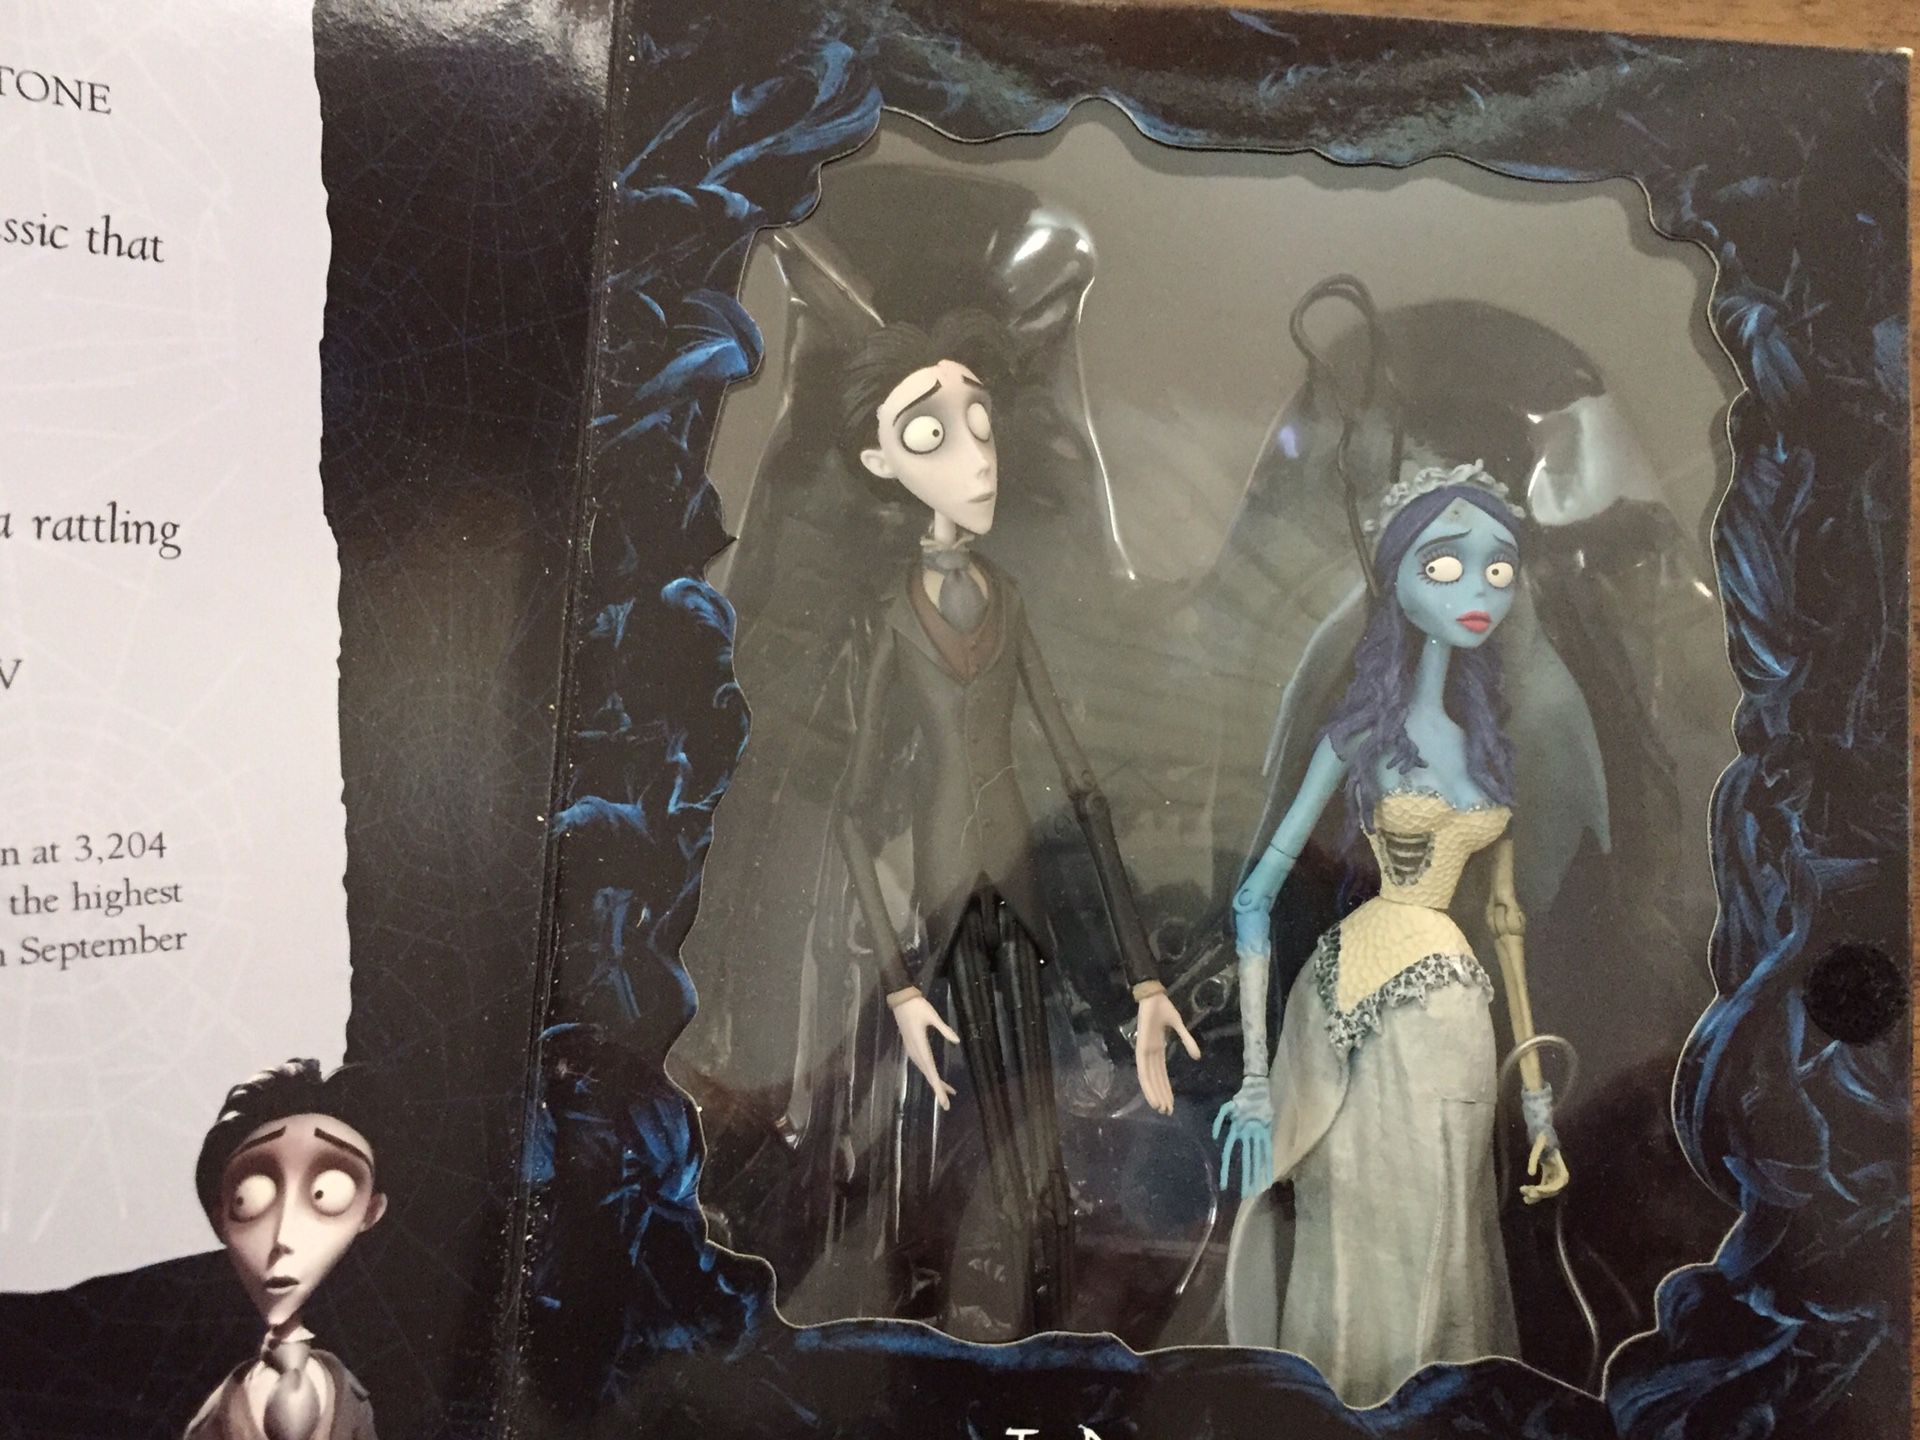 Tim Burton's Corpse Bride & Victor Commemorative 2 pack figures This was produced by McFarlane Toys in 2005